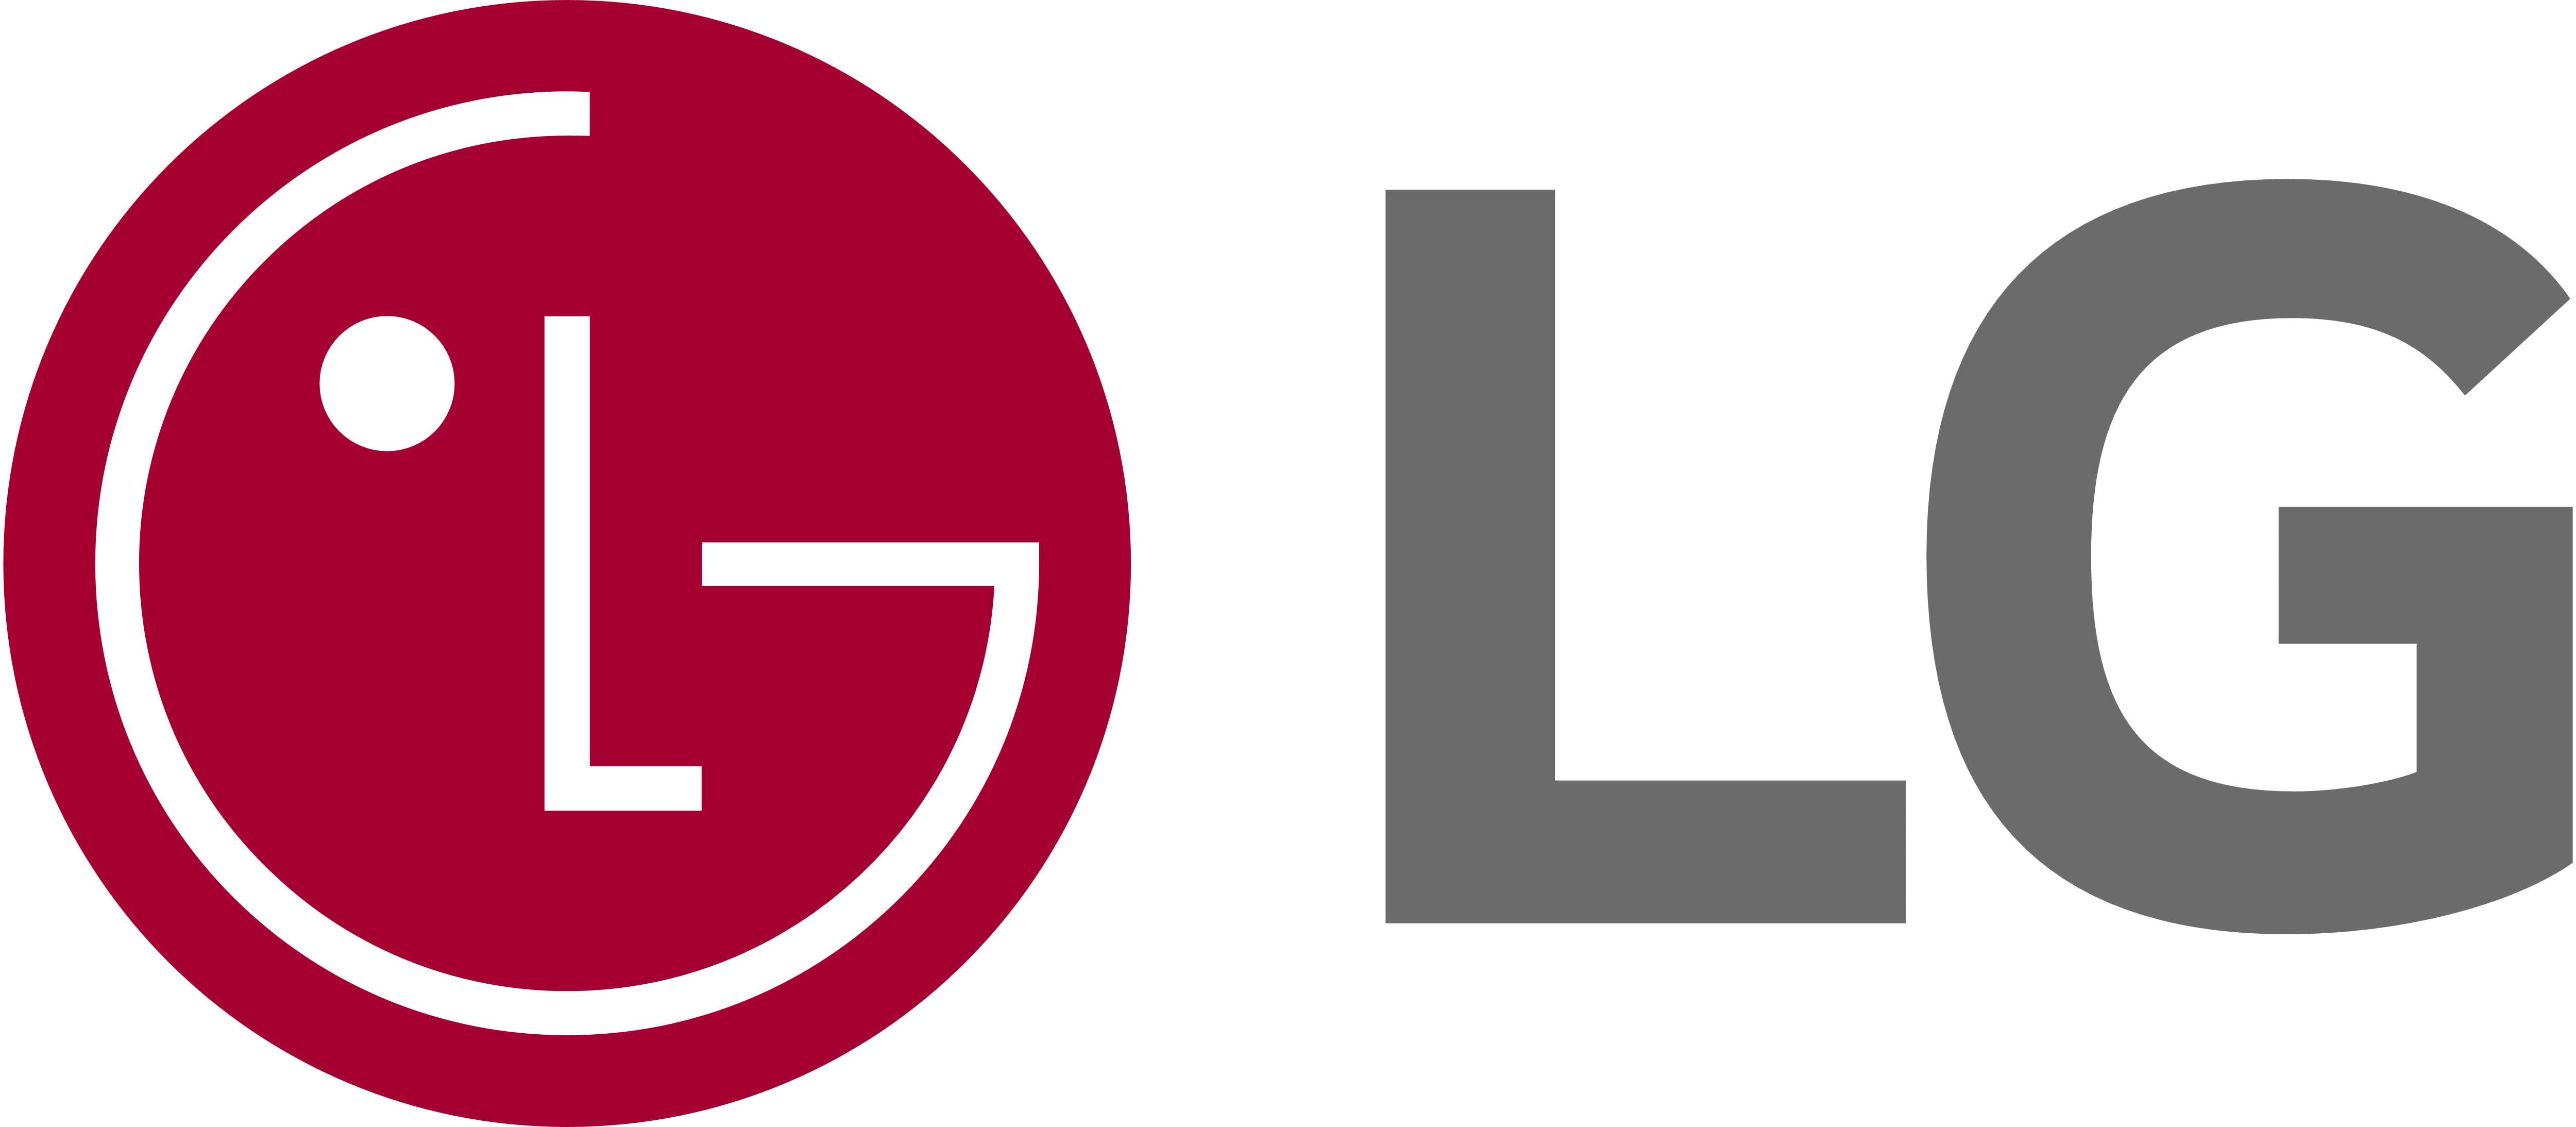 LG Oven Service Near Me, LG Oven Repair